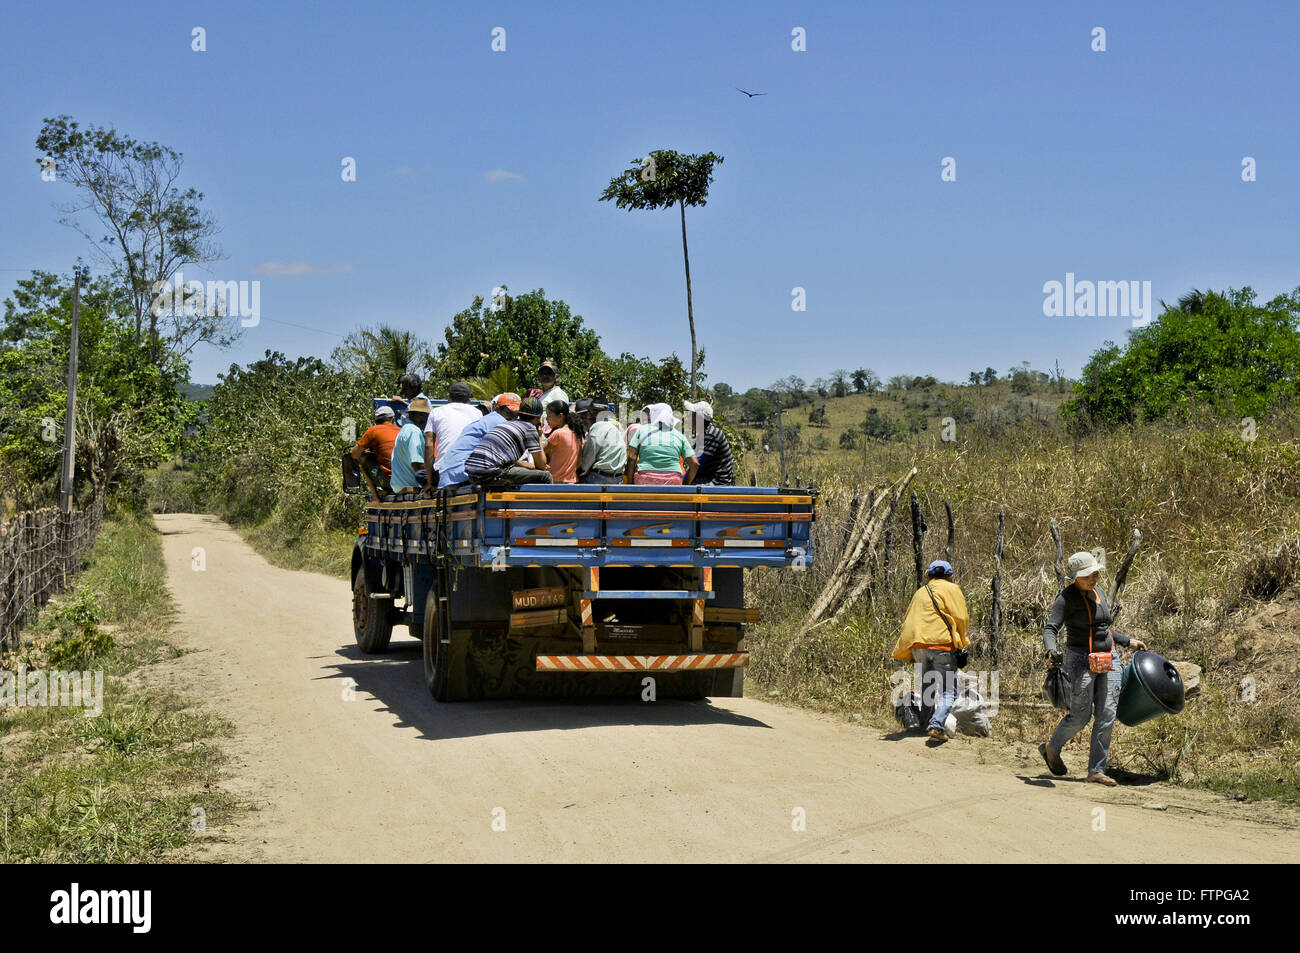 Truck carrying people on dirt road in rural area - region of Vale do Paraiba Stock Photo